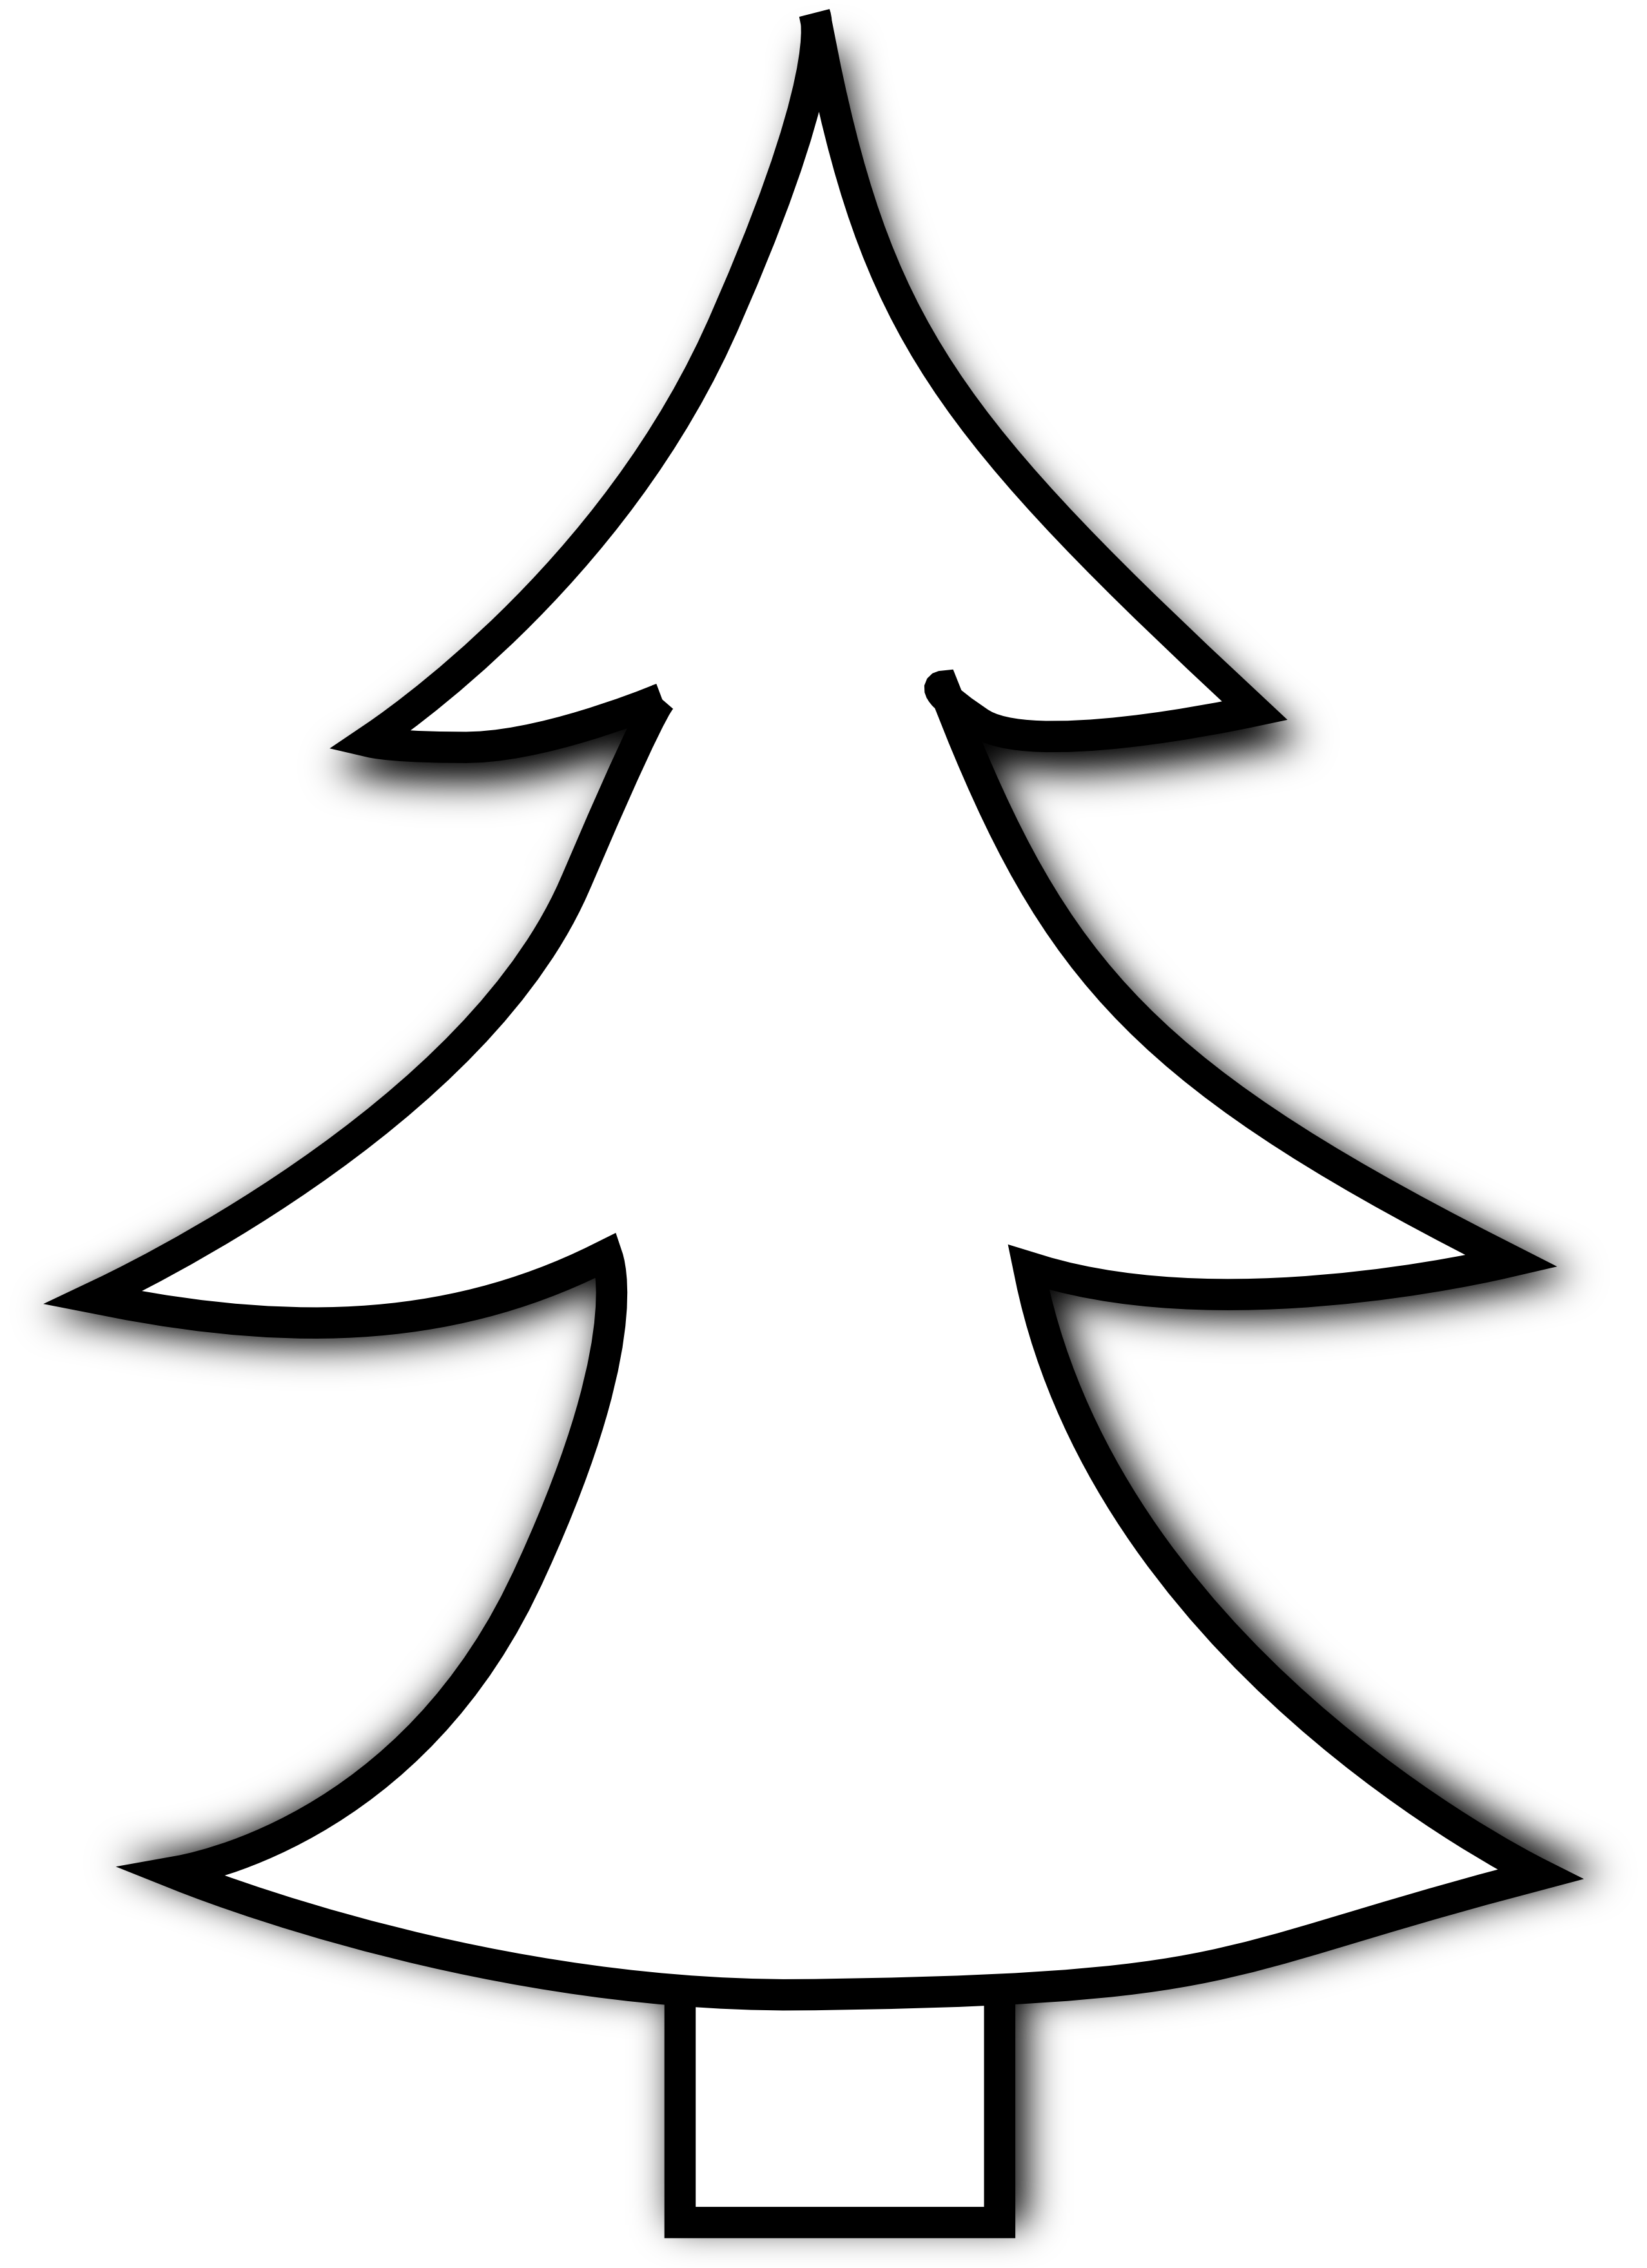 Tree  black and white christmas tree clipart black and white free